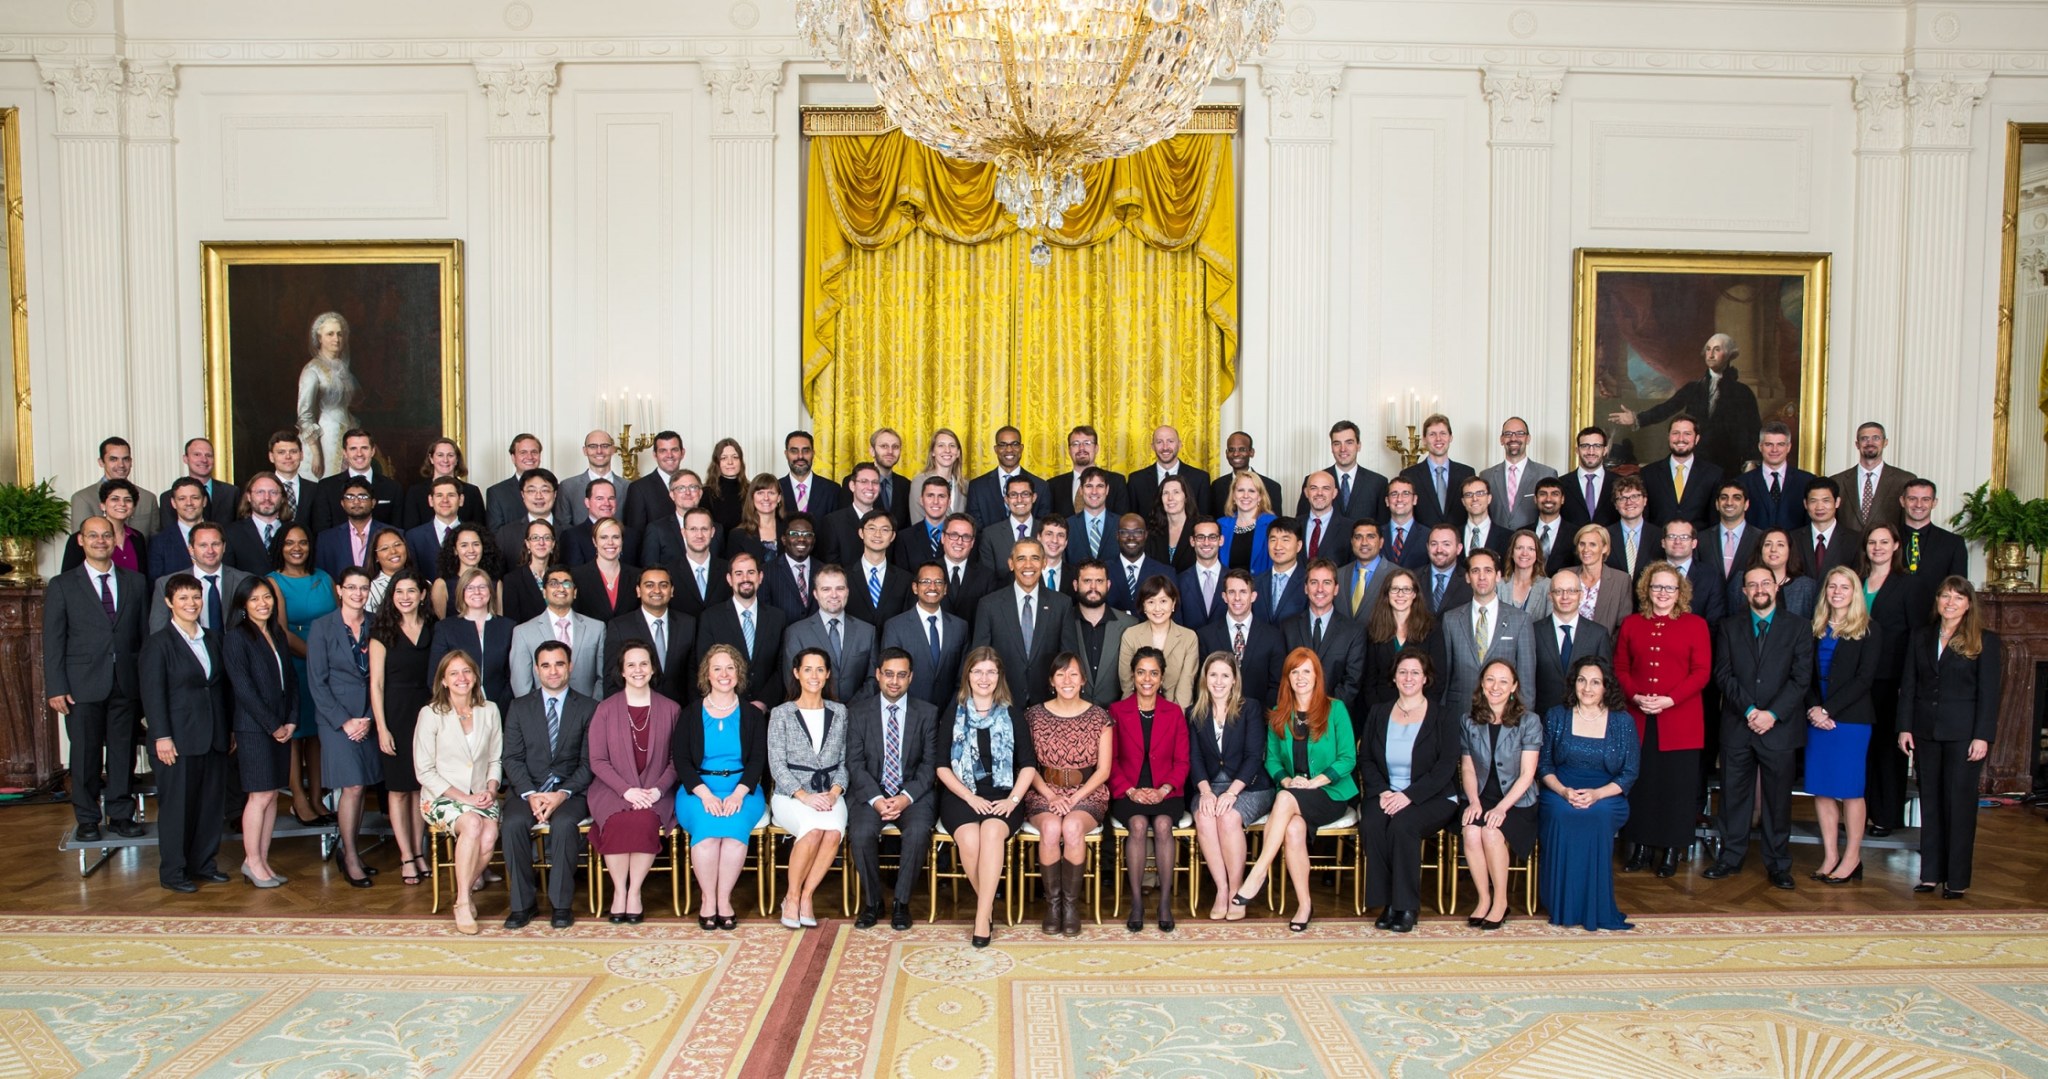 Andrew Molthan, third row, sixth from left, a meteorologist in the Earth Science Office, was recognized May 5 by President Obama